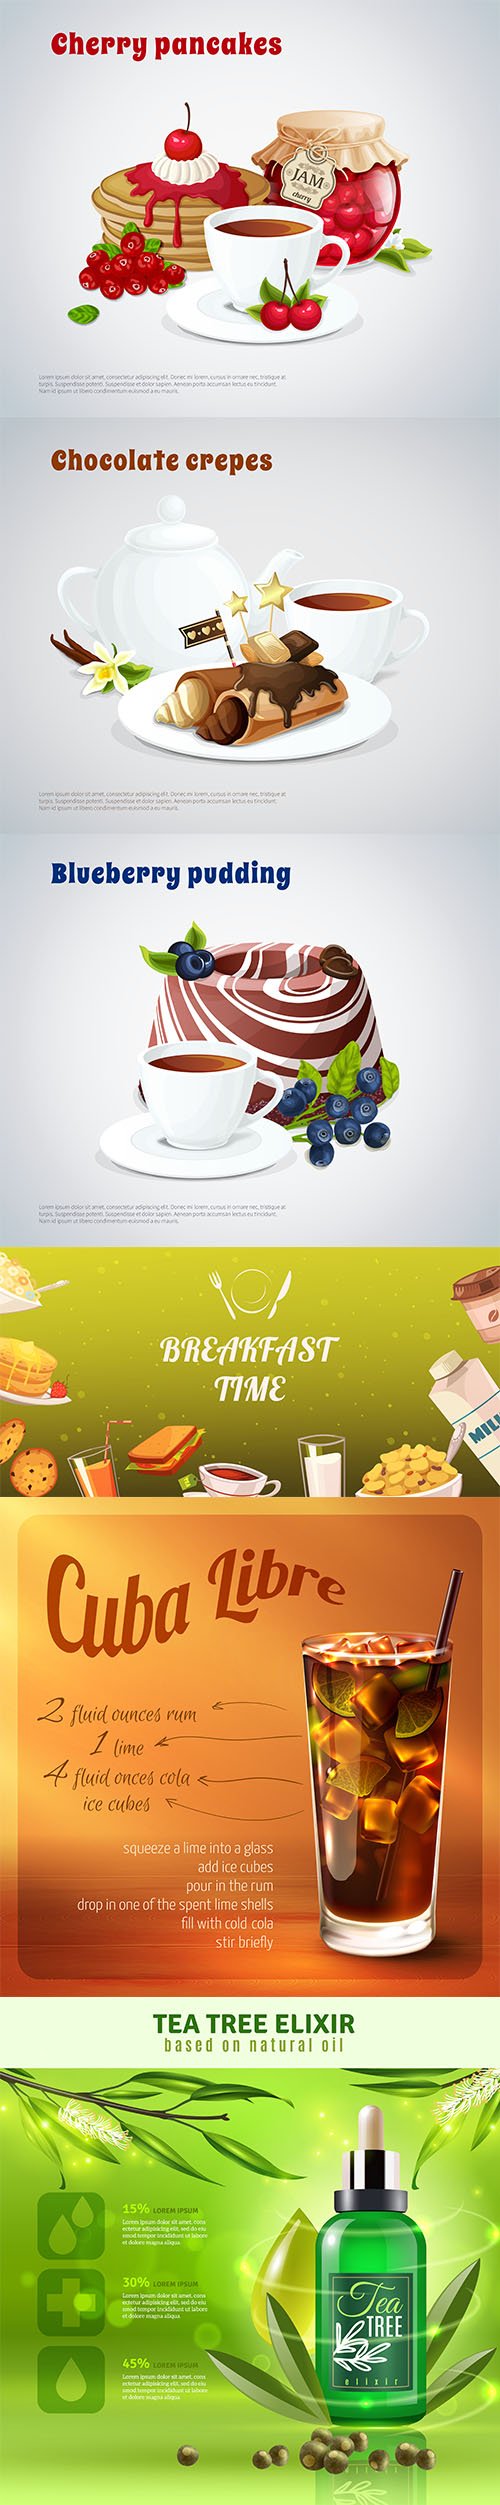 Tea time background collection vol 2